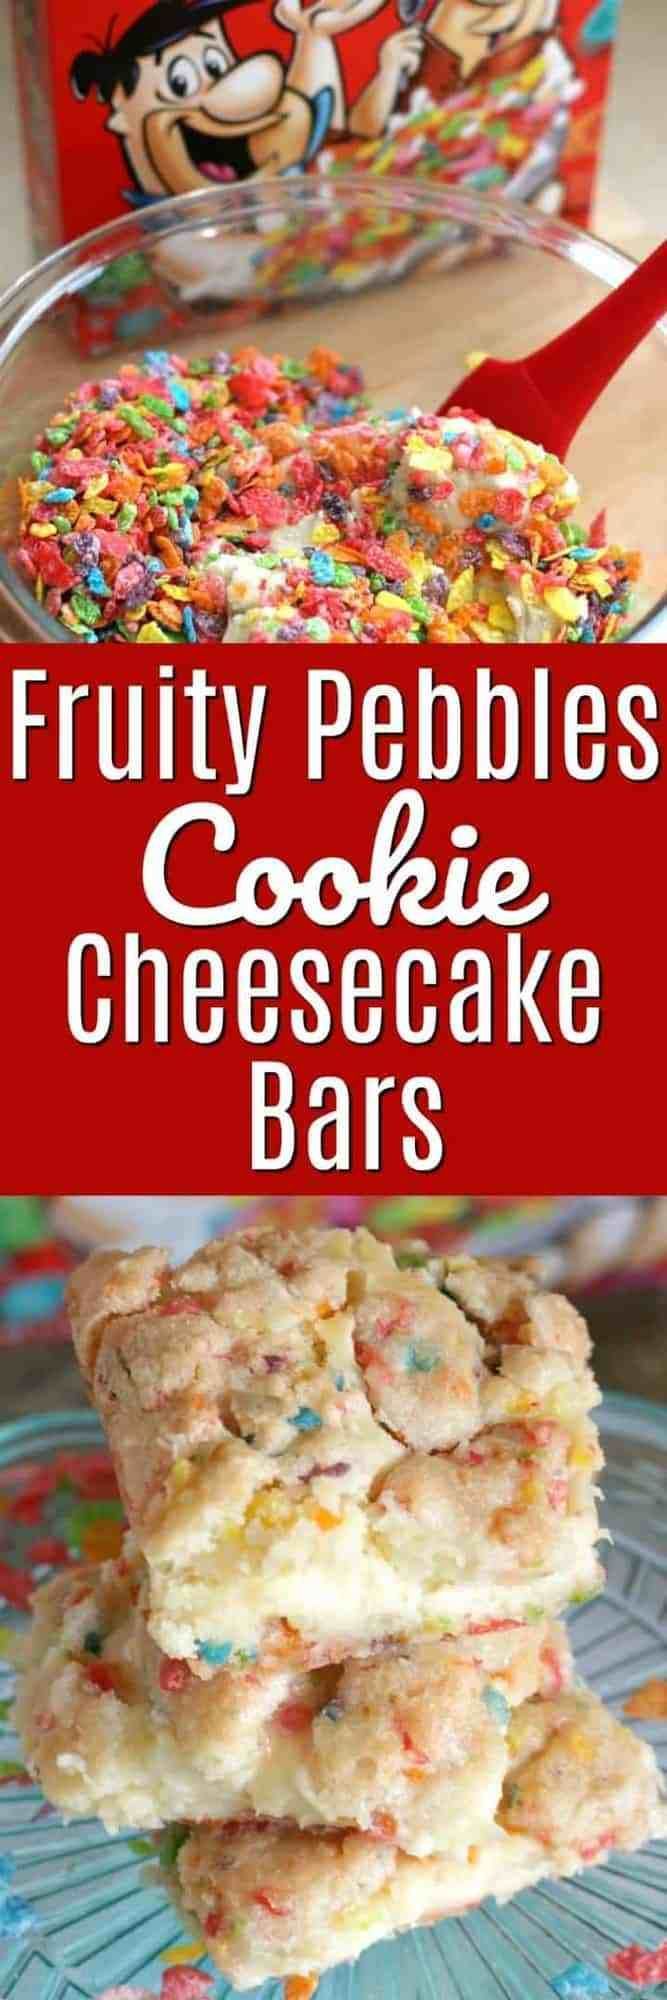 Fruity Pebbles Cookie Cheesecake Bars - 6 Ingredients and easy to make! -   16 fruity desserts Recipes ideas